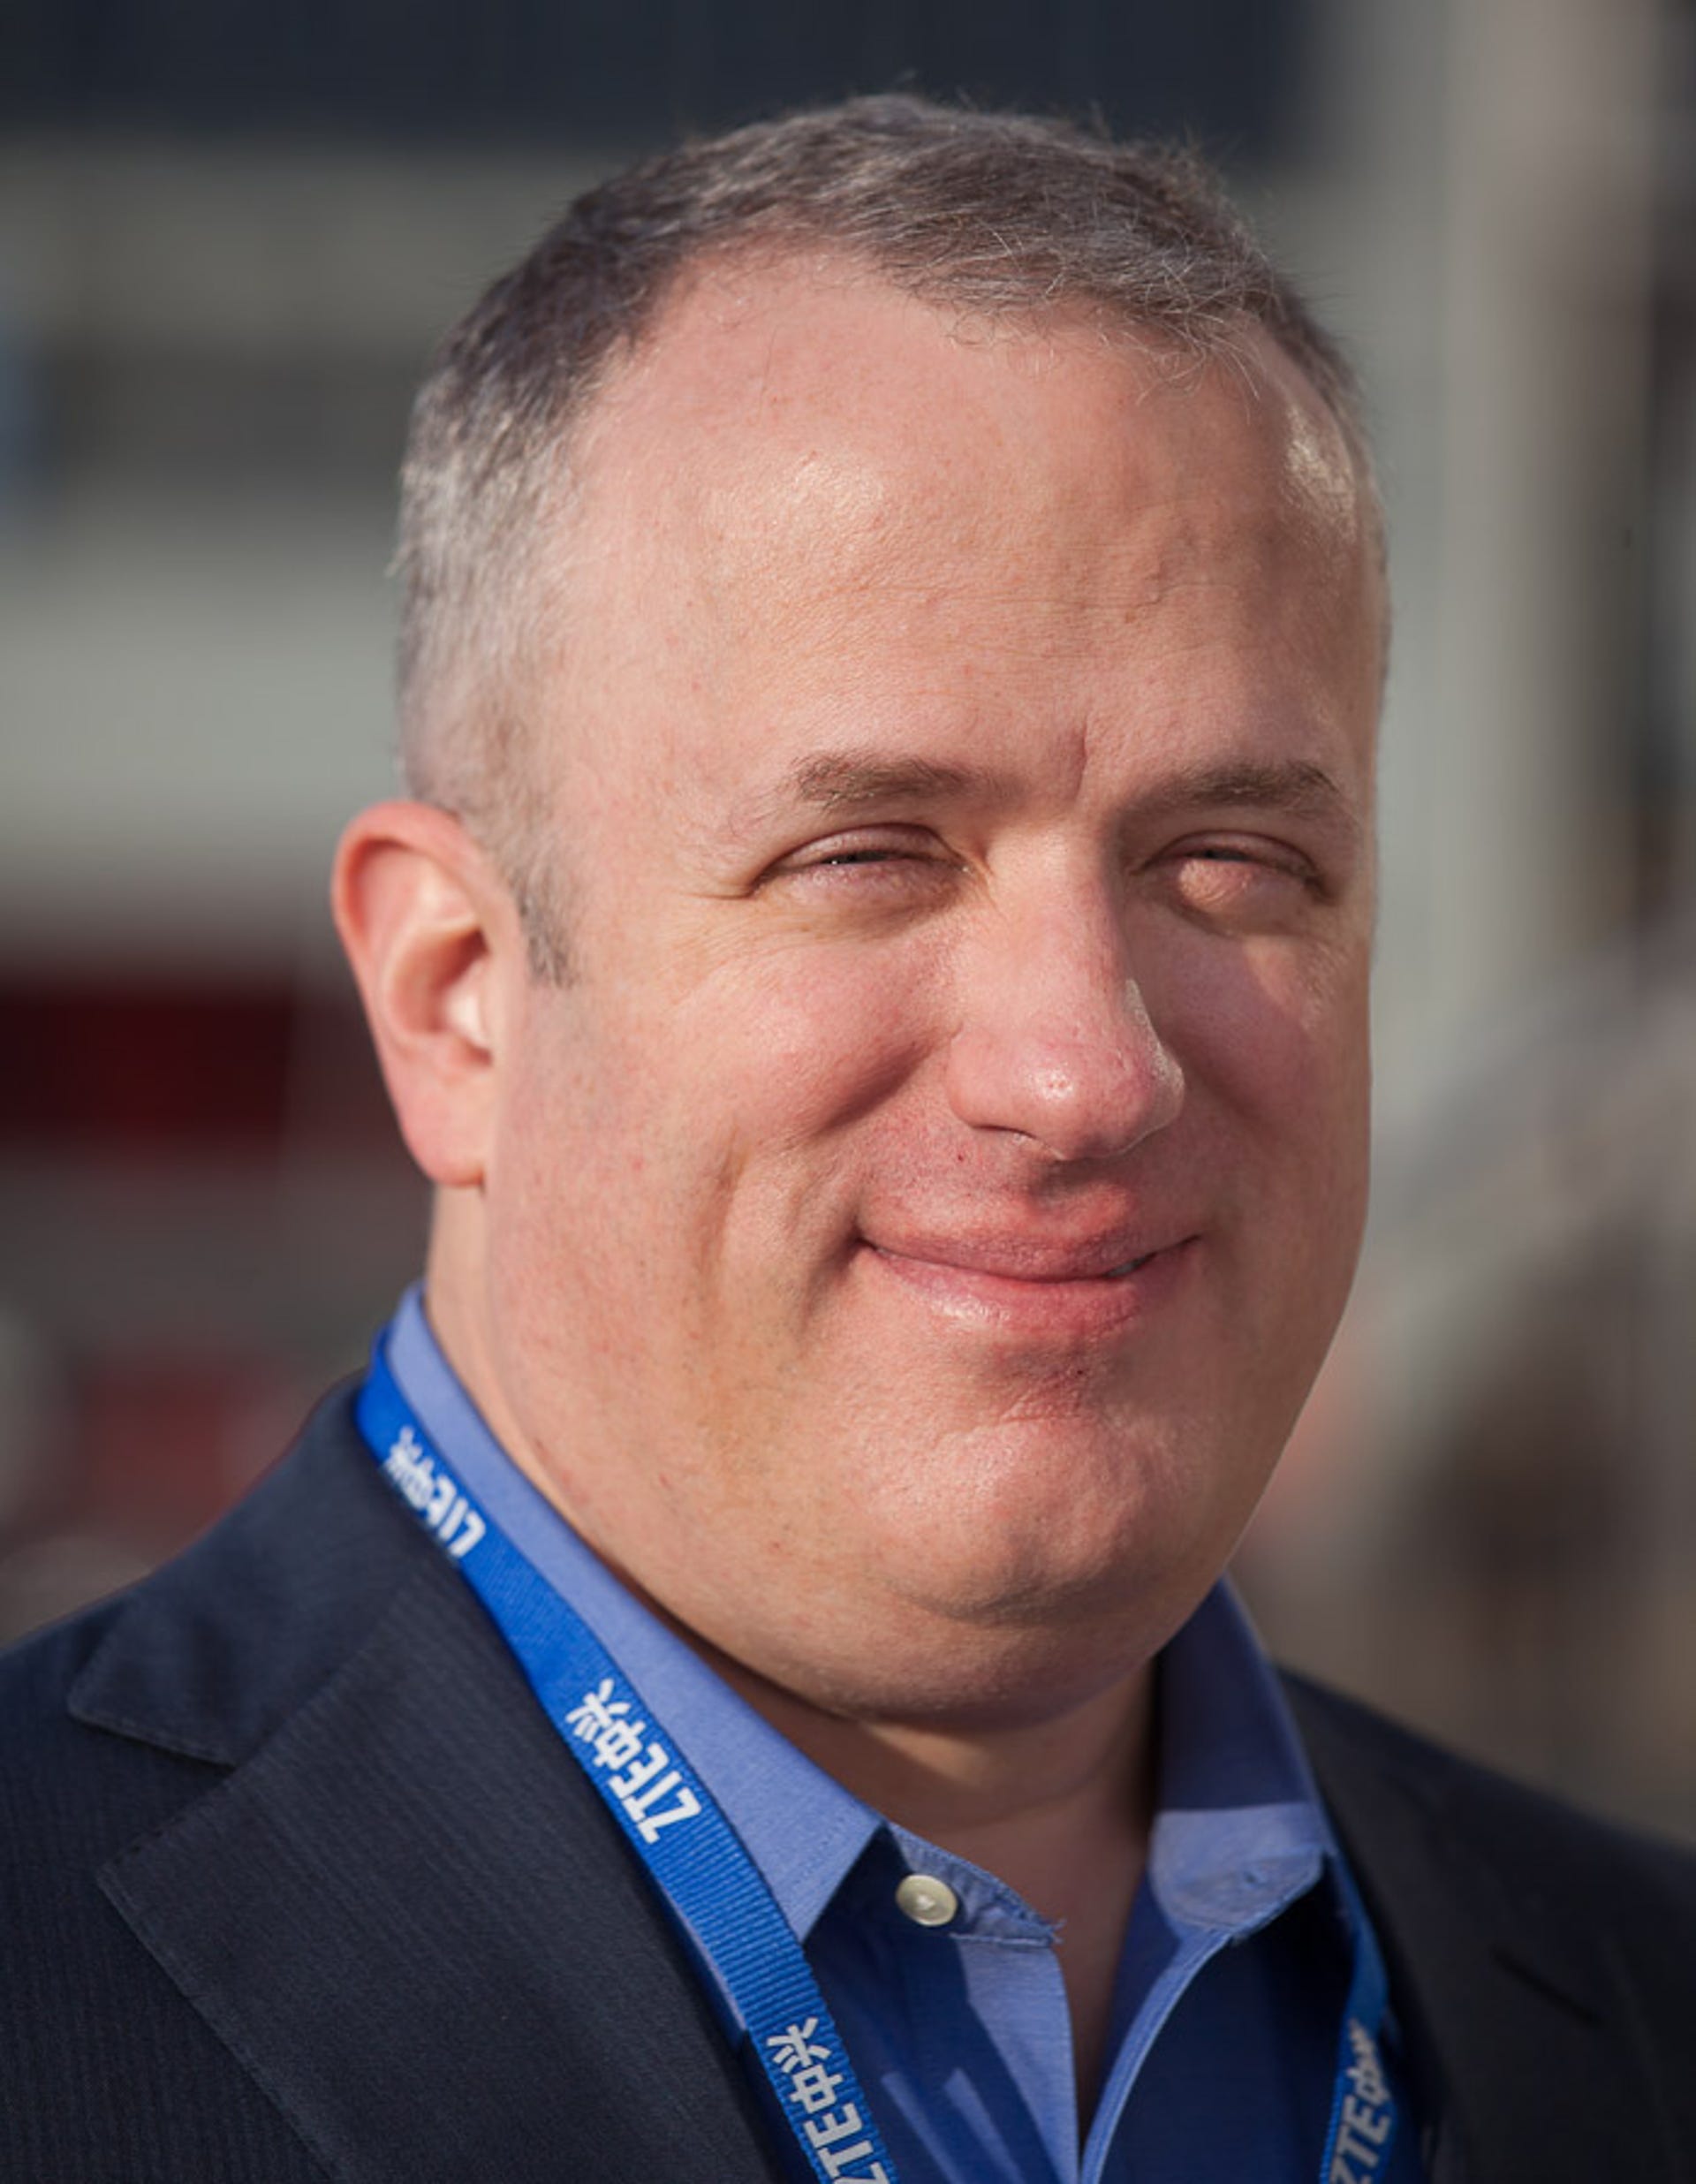 Brave CEO and JavaScript inventor Brendan Eich